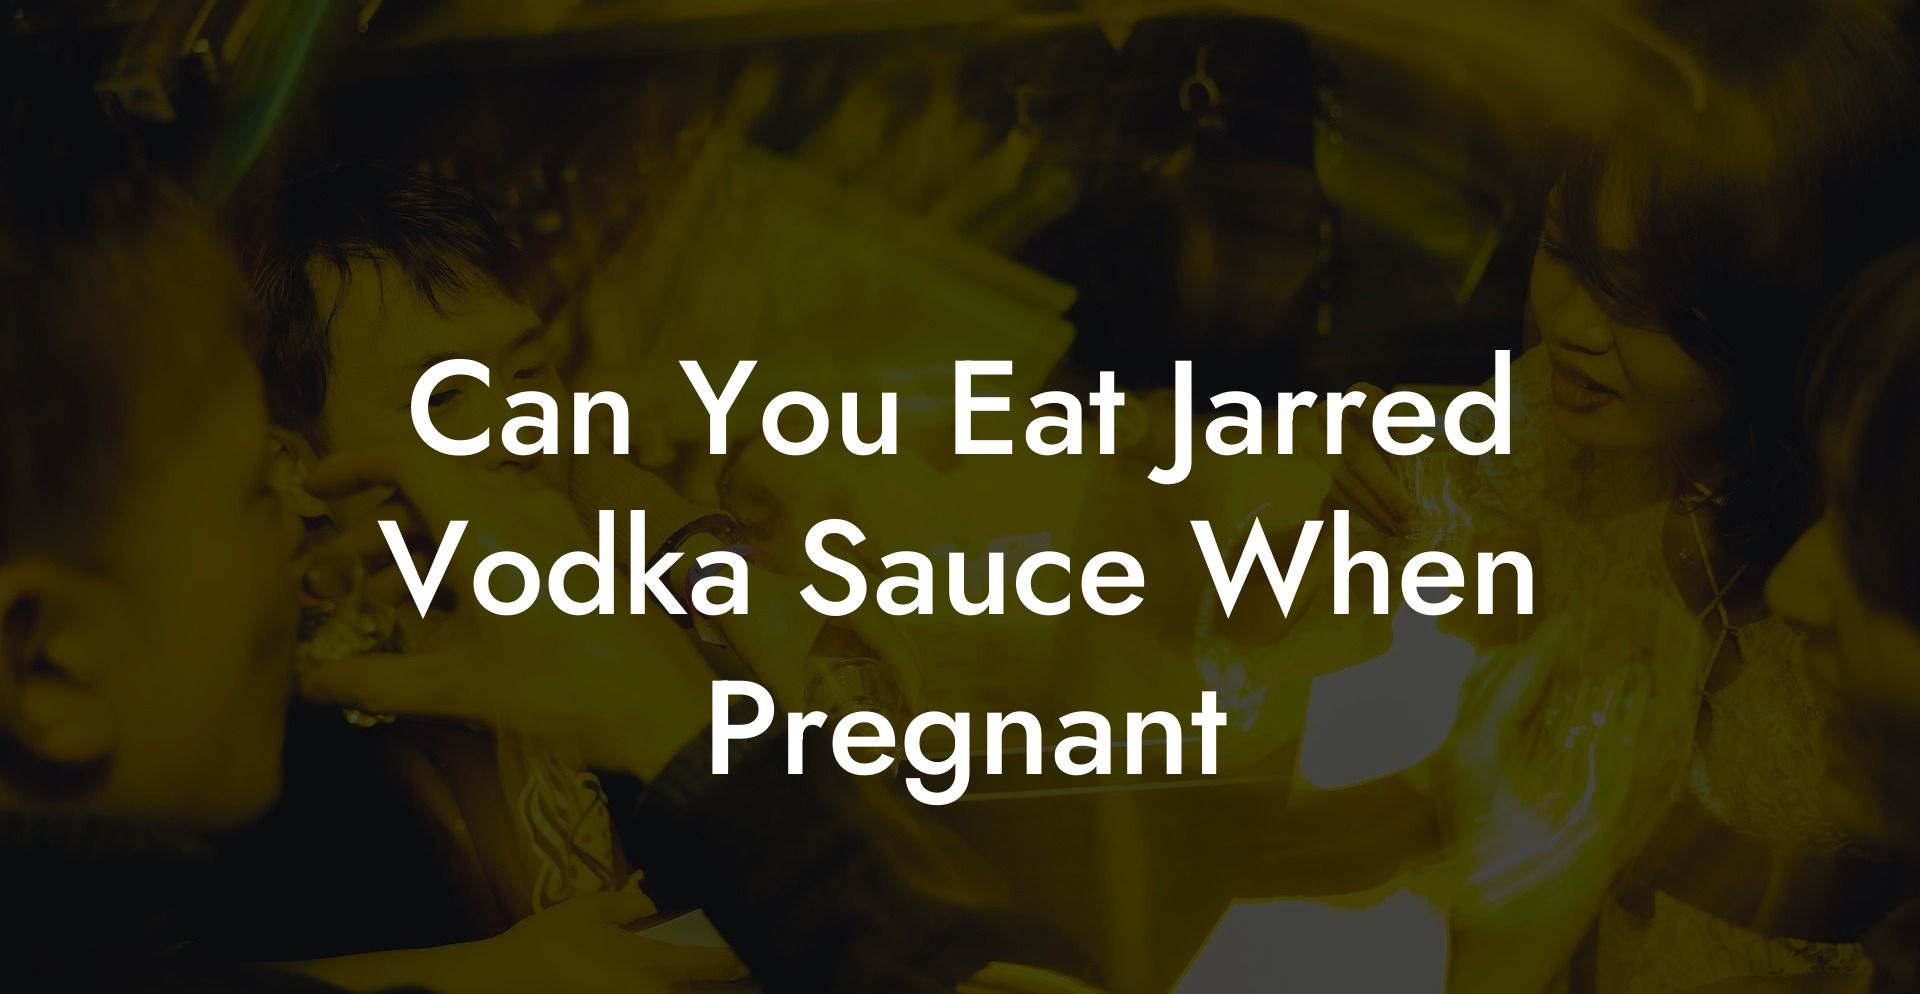 Can You Eat Jarred Vodka Sauce When Pregnant